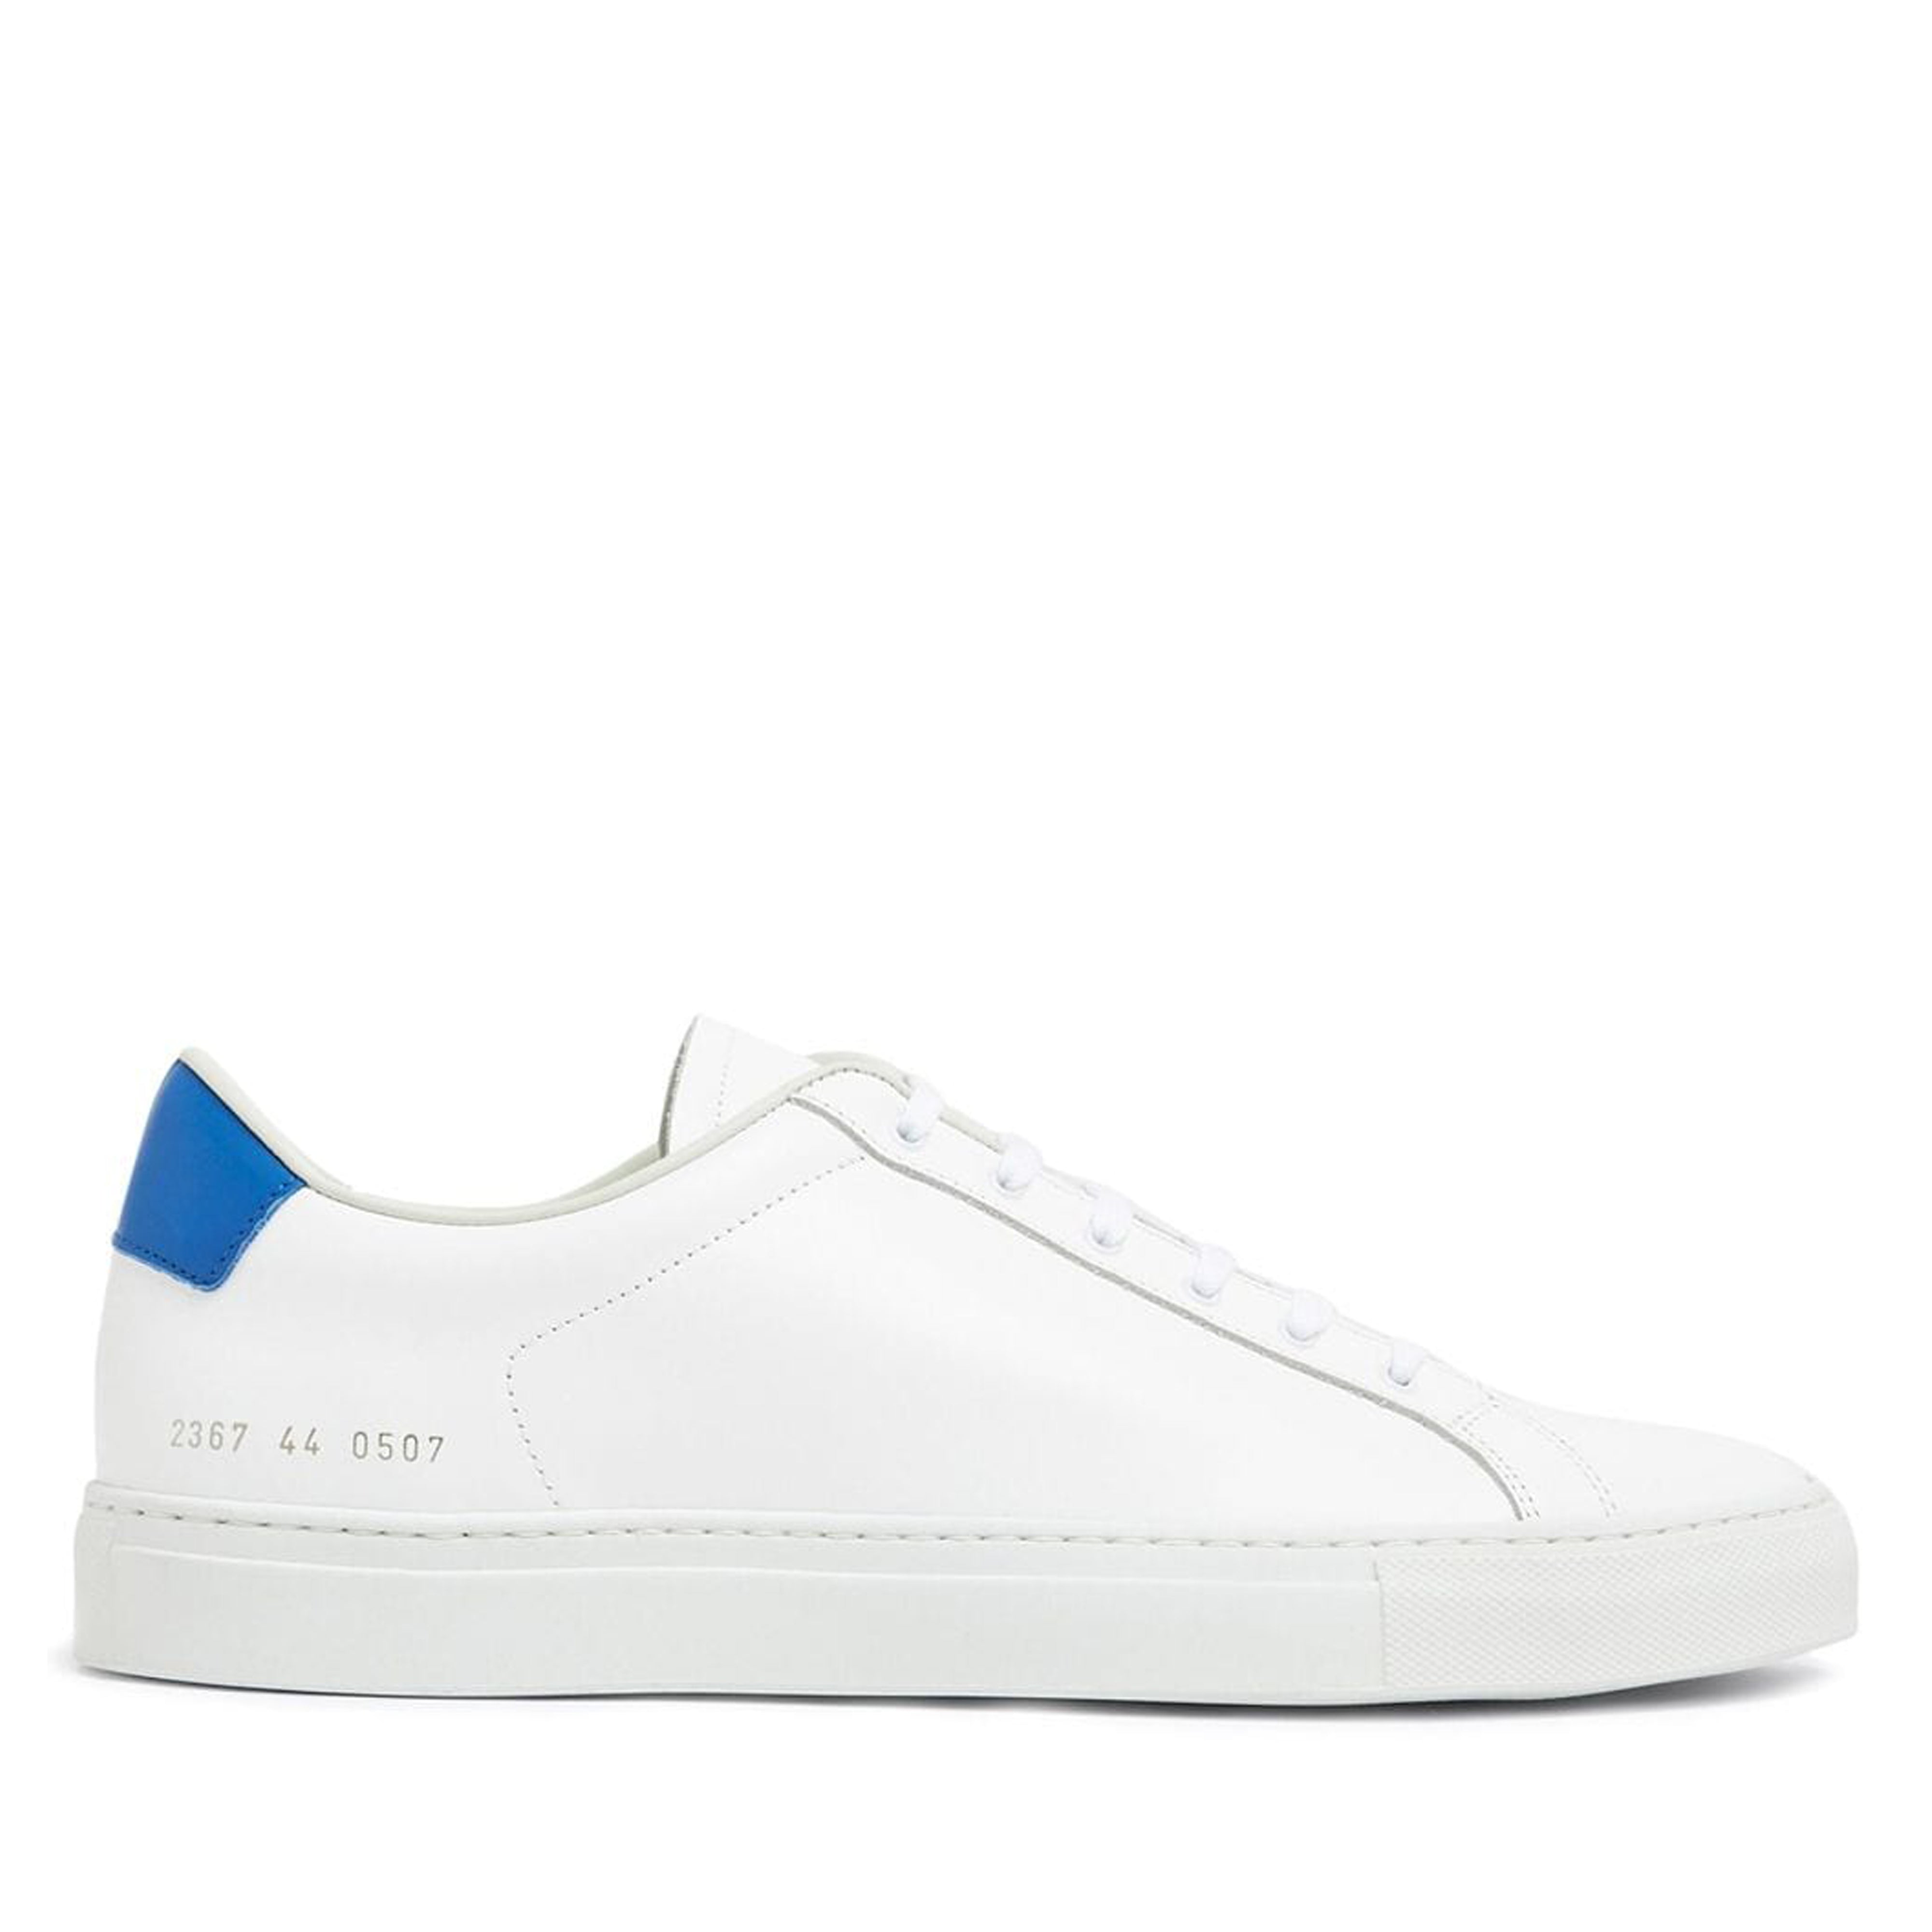 Woman's common projects | Common projects, White sneaker, Shoes